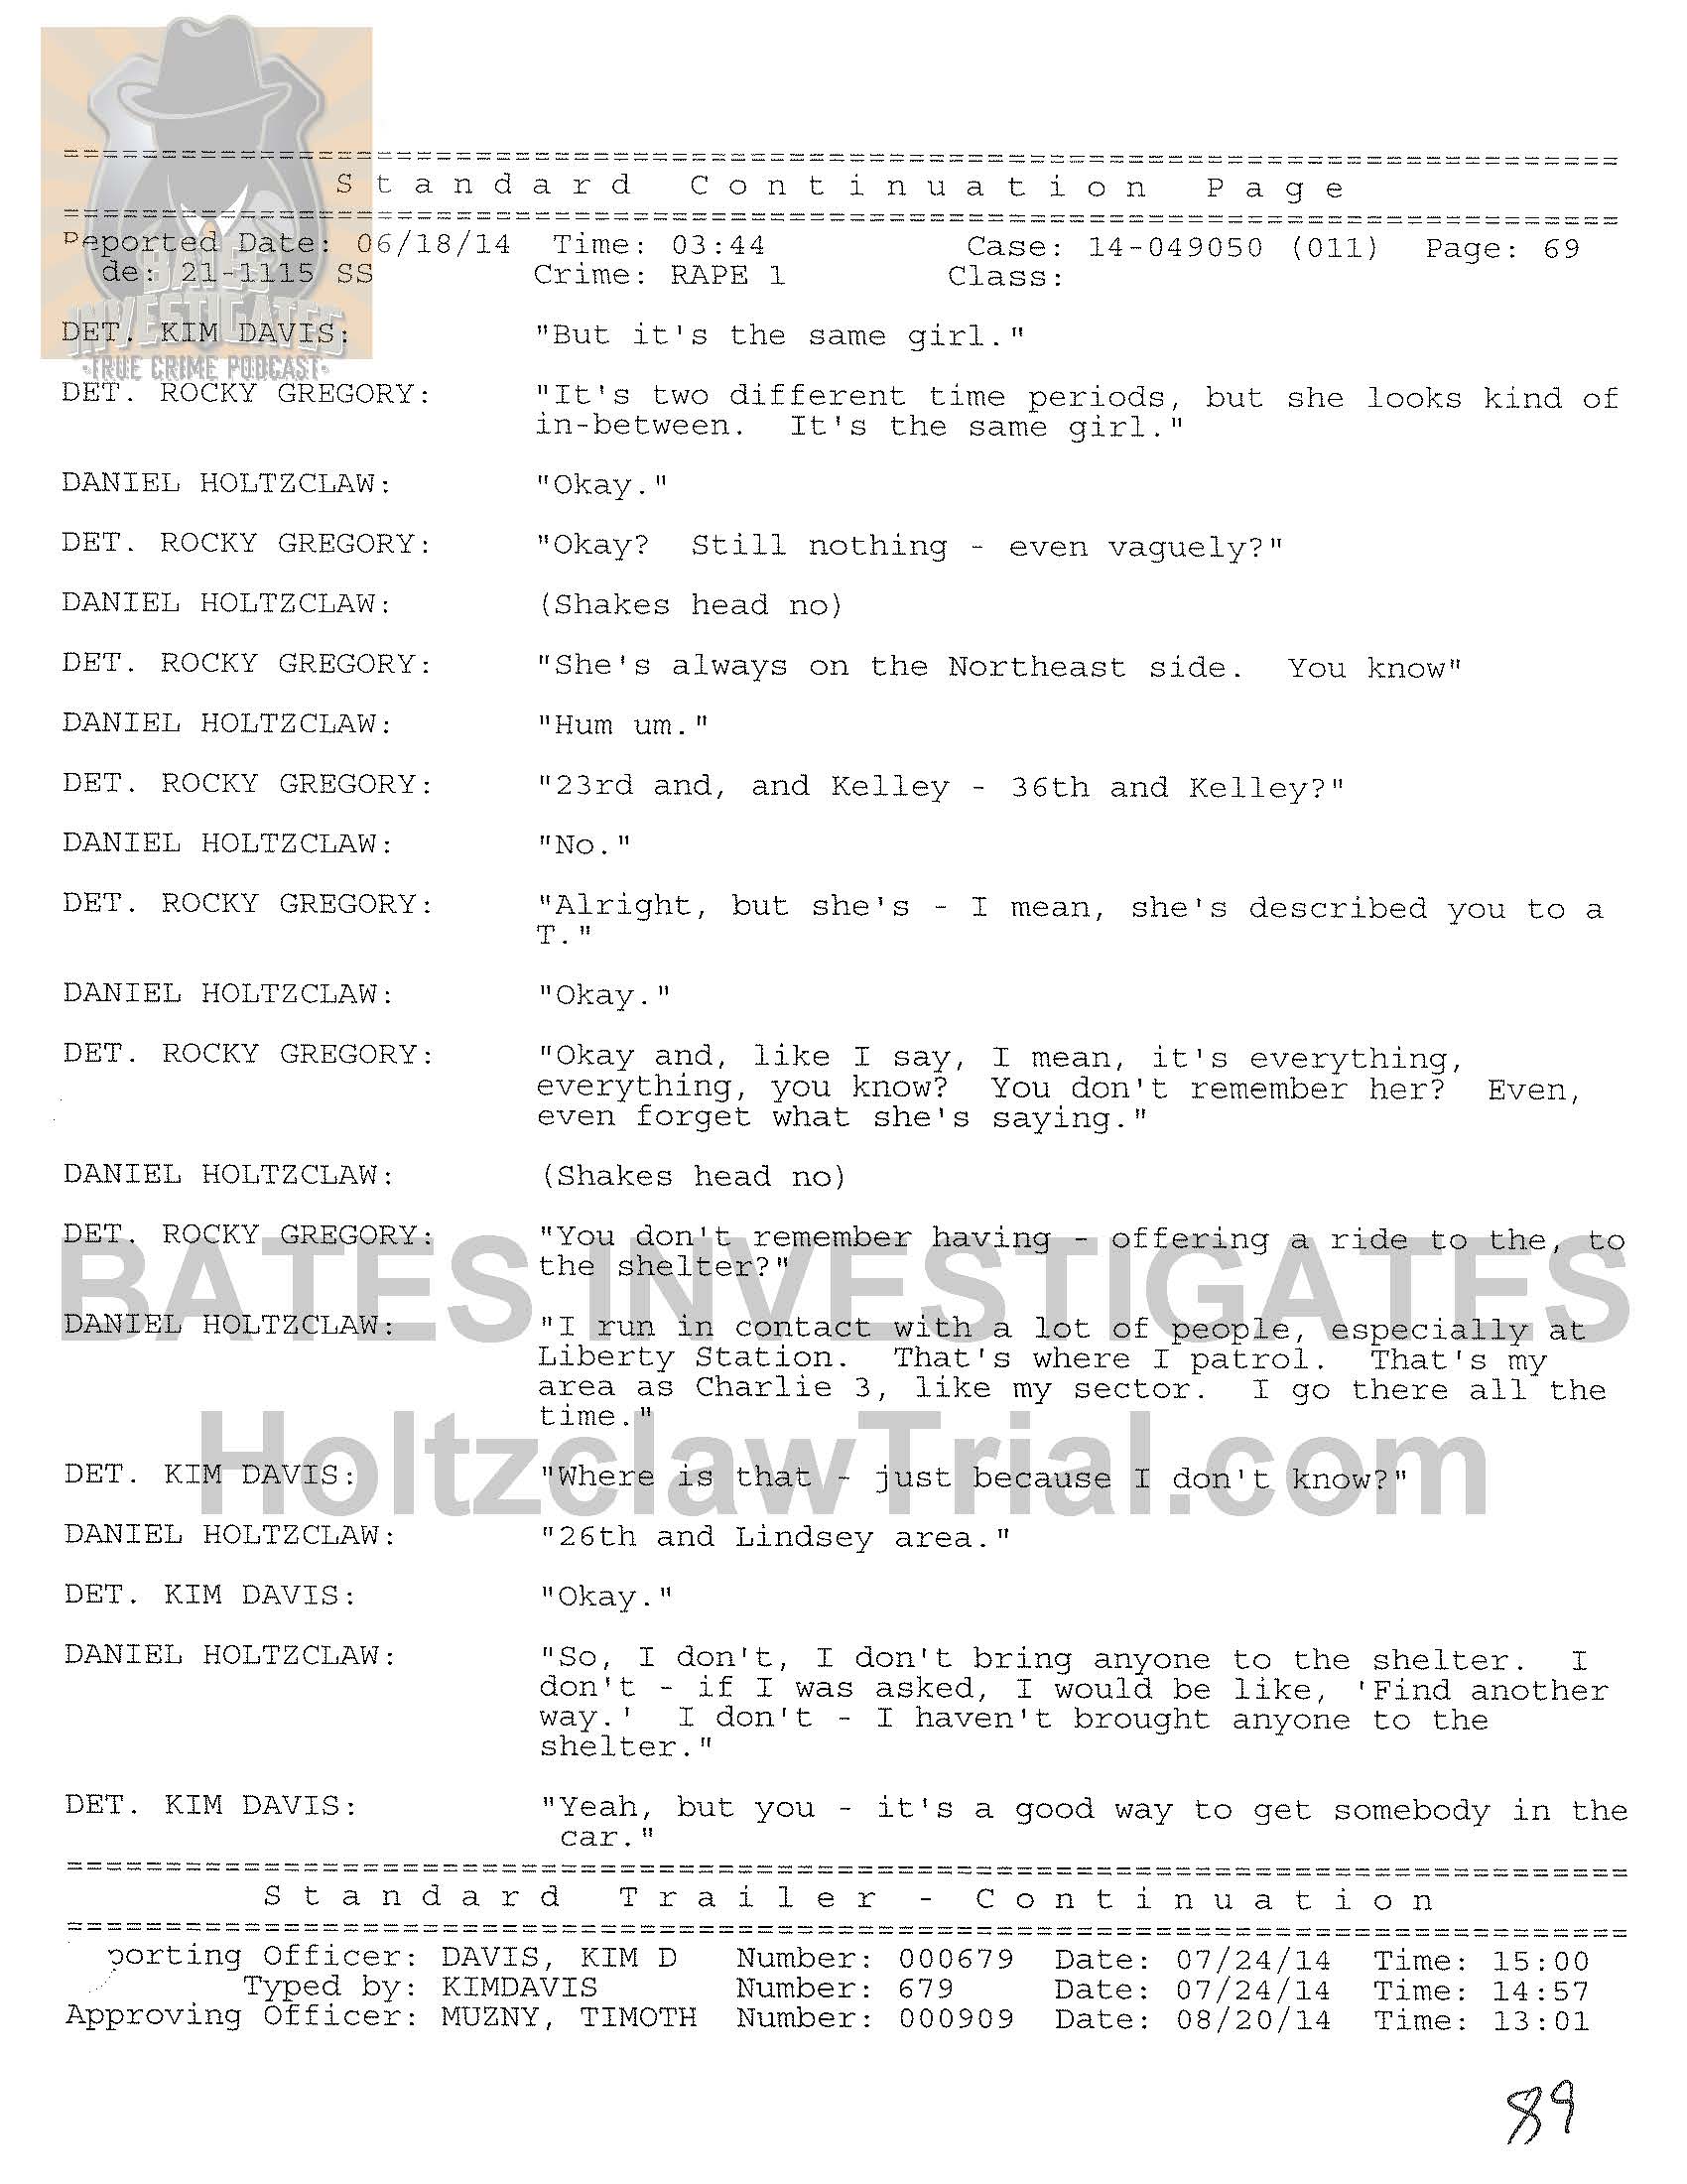 Holtzclaw Interrogation Transcript - Ep02 Redacted_Page_69.jpg